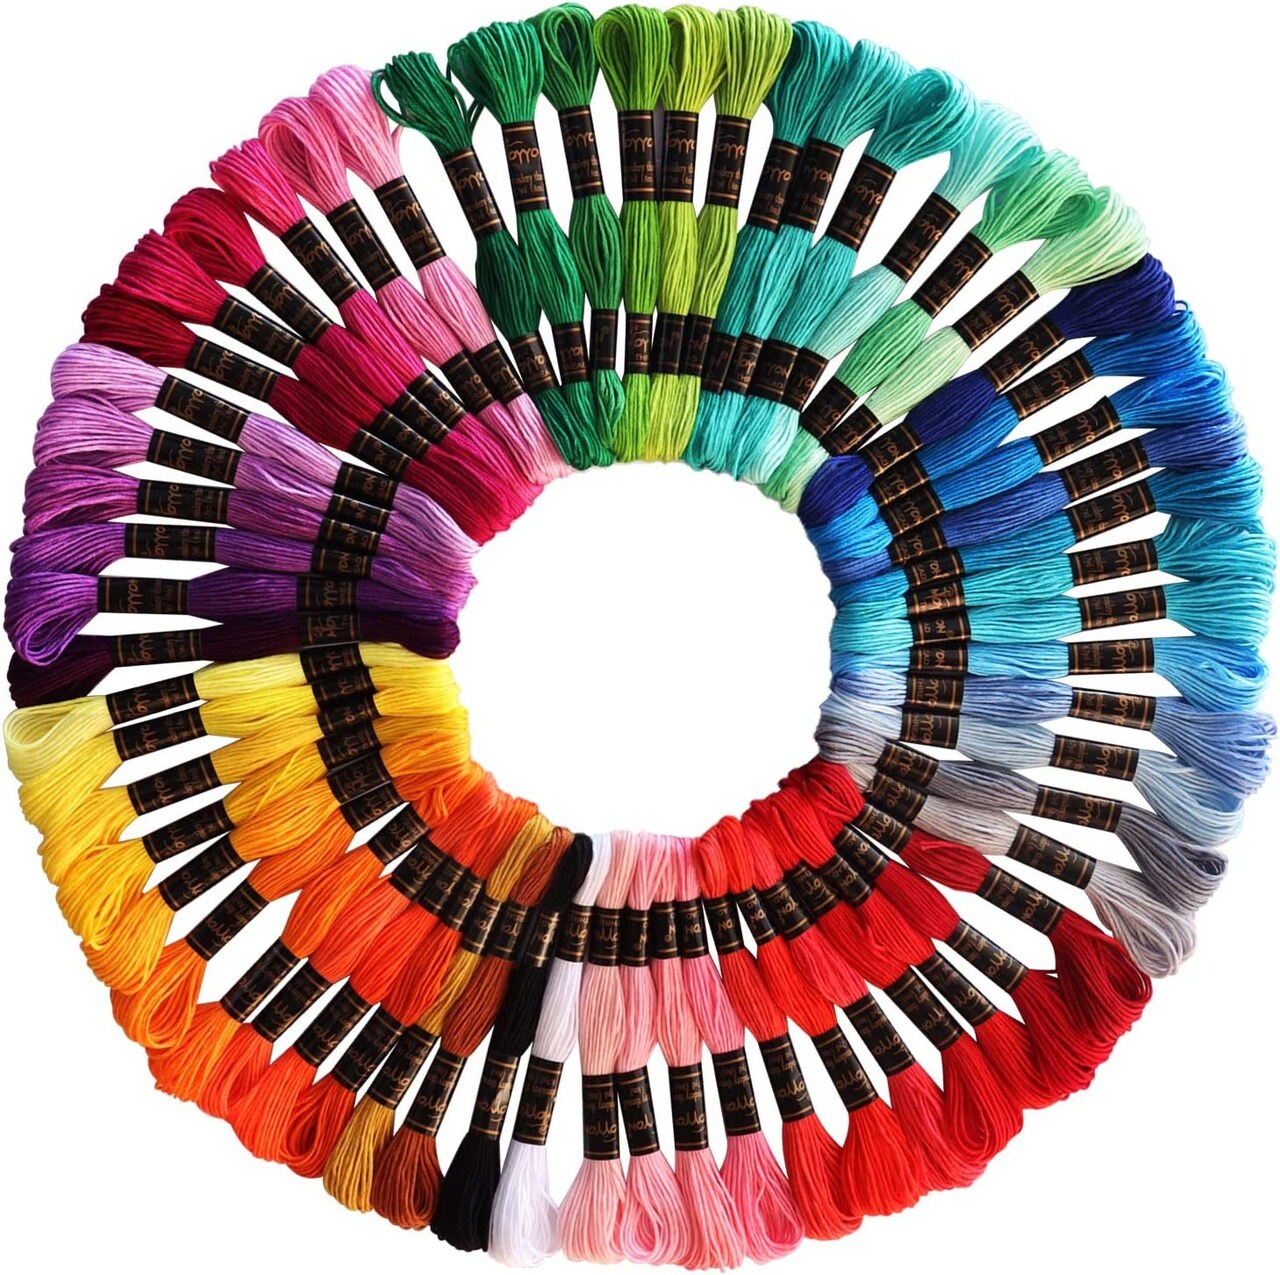 122 Skeins Embroidery Floss - Embroidery Thread - Friendship